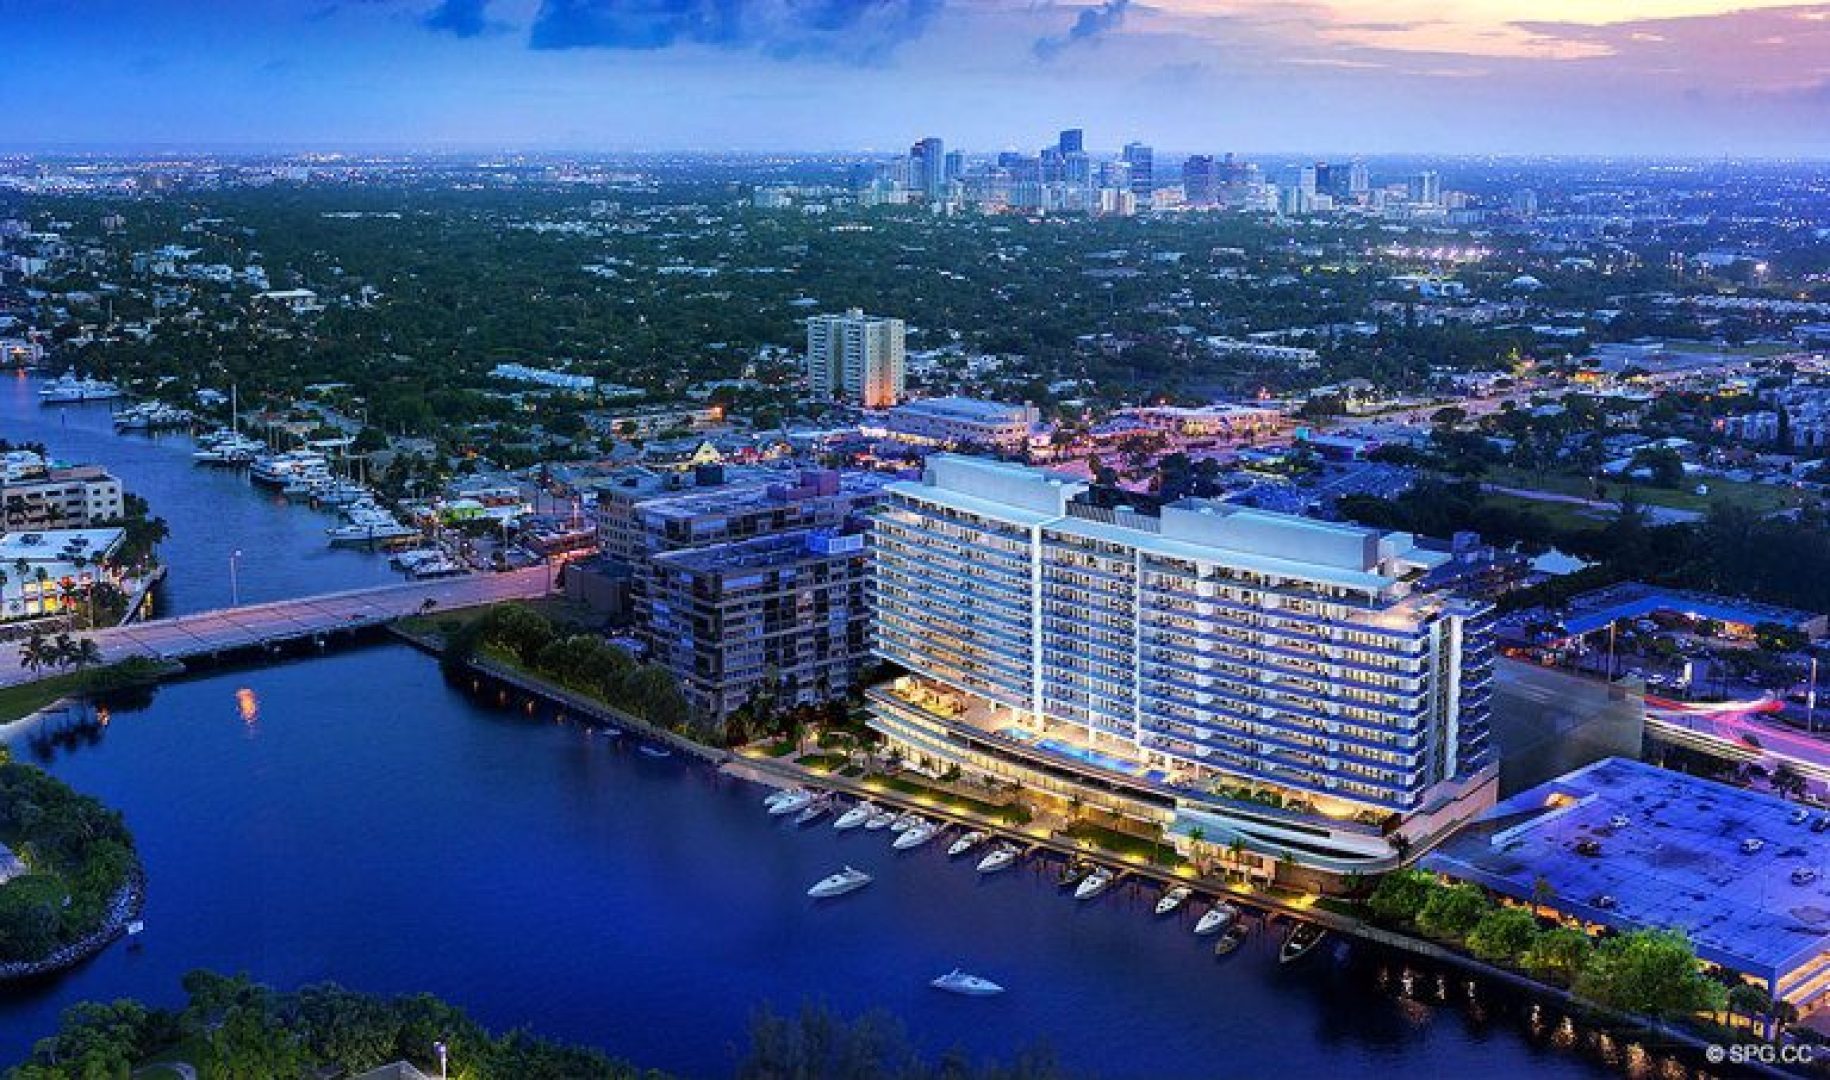 Aerial View of Riva, Luxury Waterfront Condos in Fort Lauderdale, Florida 33304.